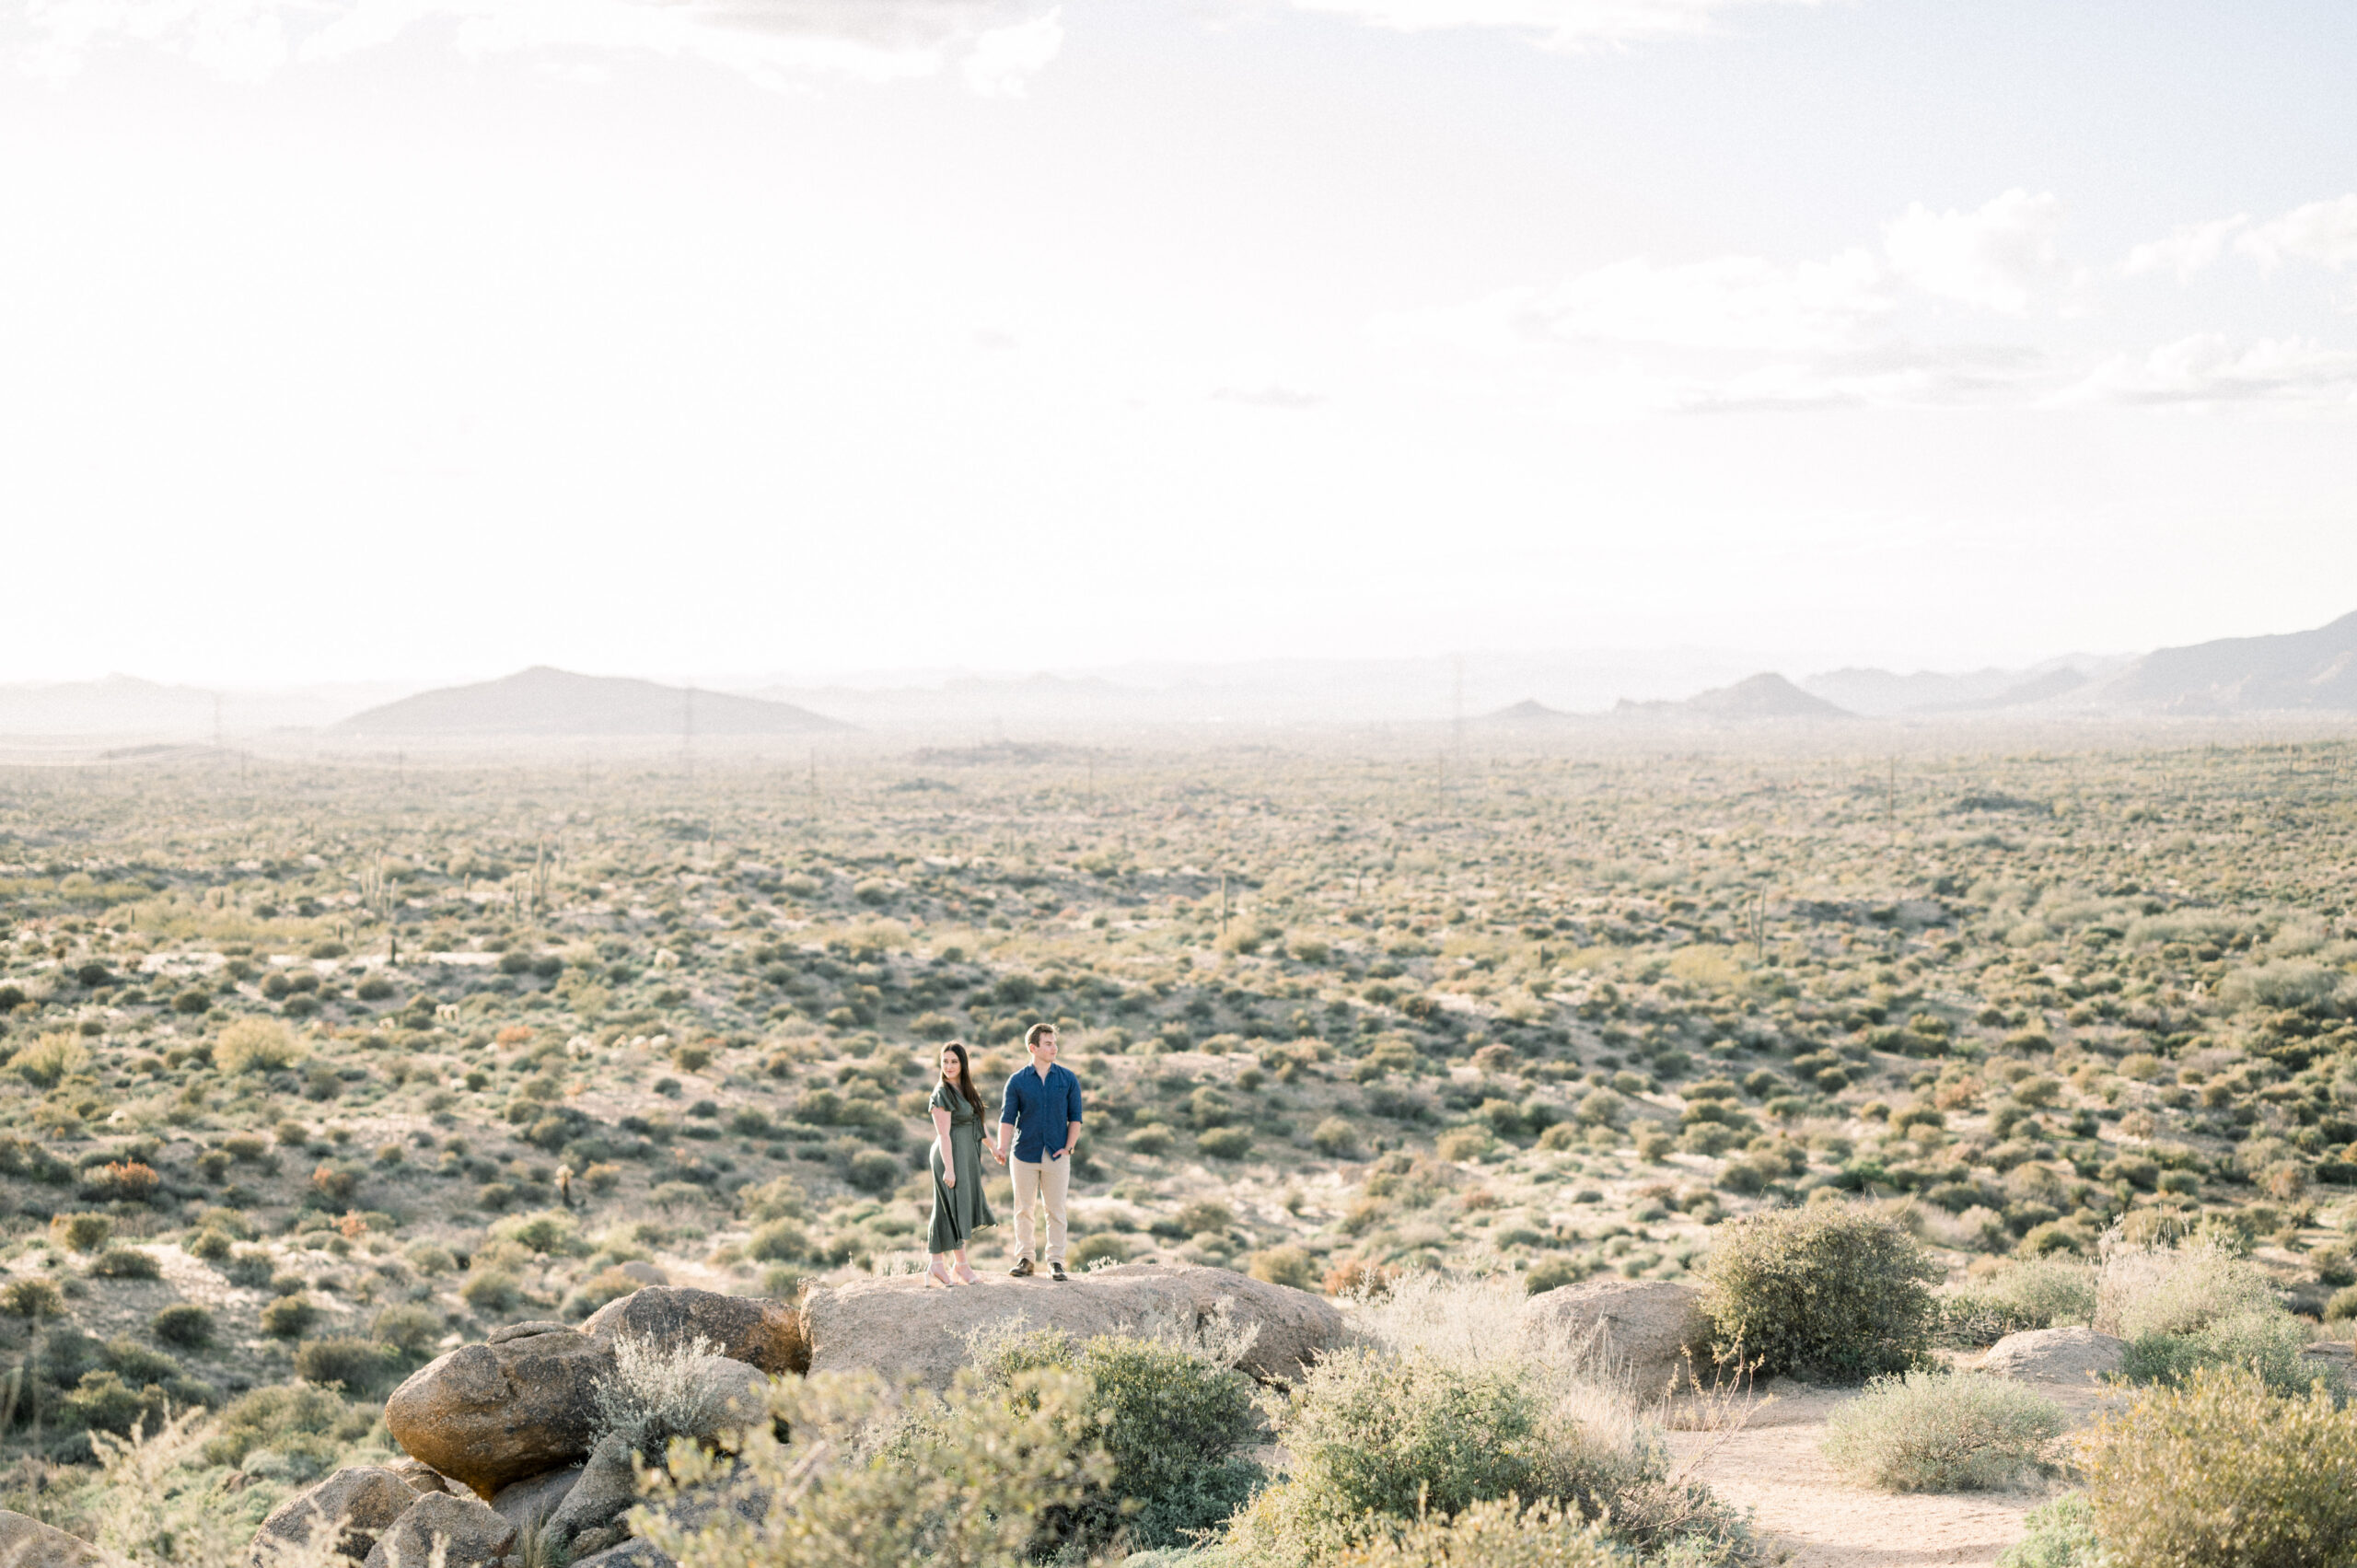 Shannon and Austins engagement session started with their pups for their Scottsdale Desert Engagement Session. We even got to pop champagne to celebrate!